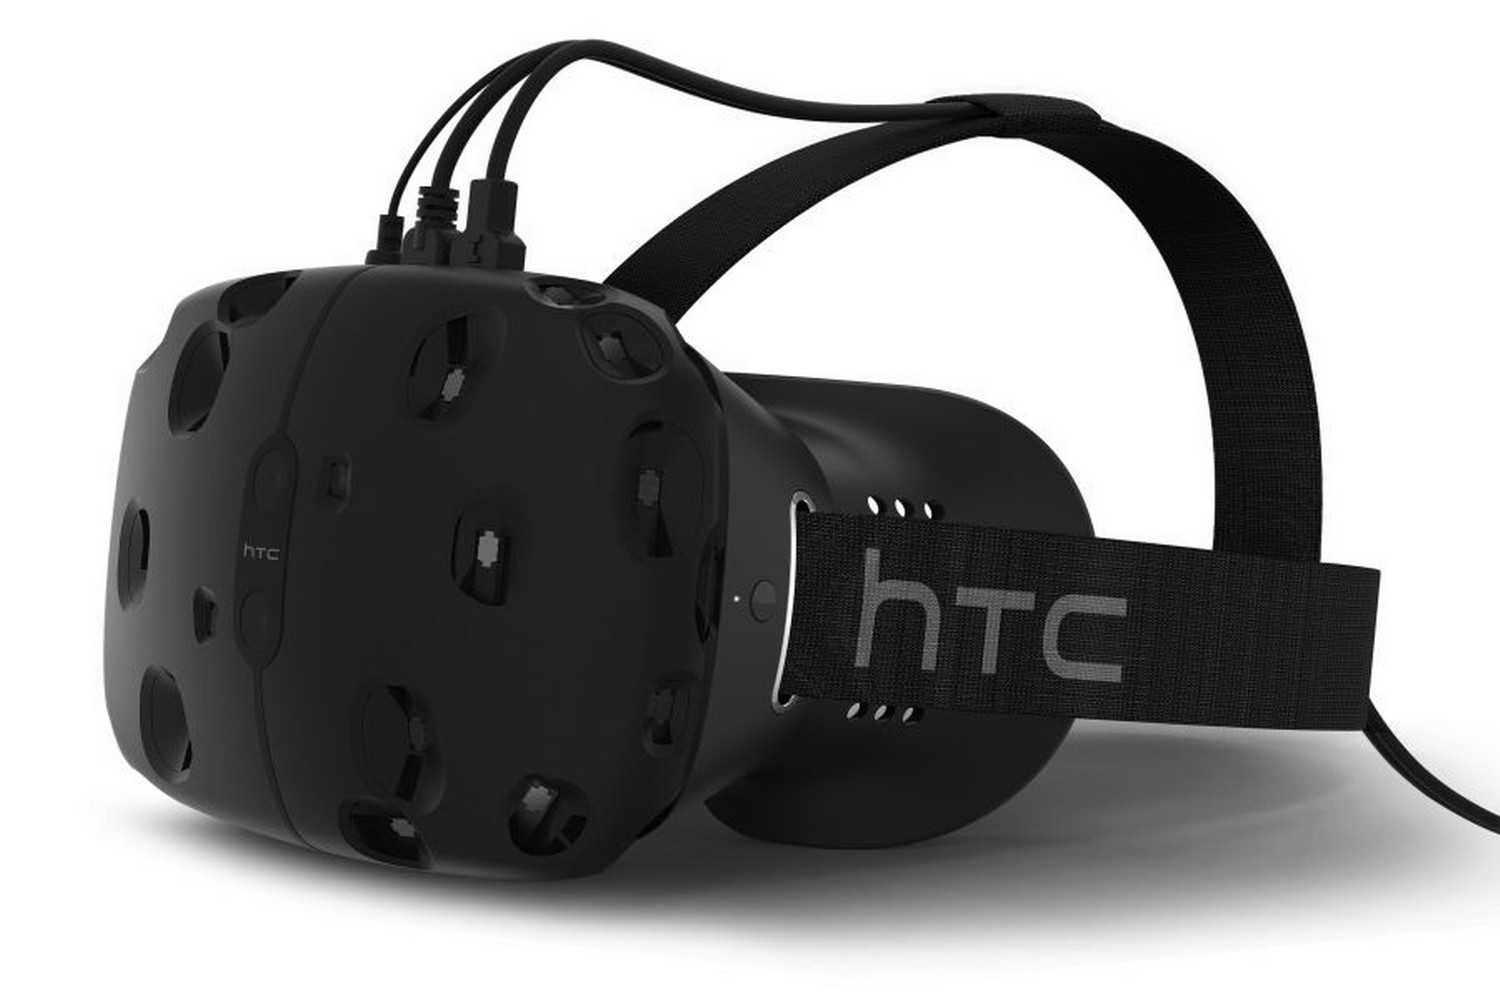 SteamVR (HTC Vive) Prototype Hands-On + Impressions